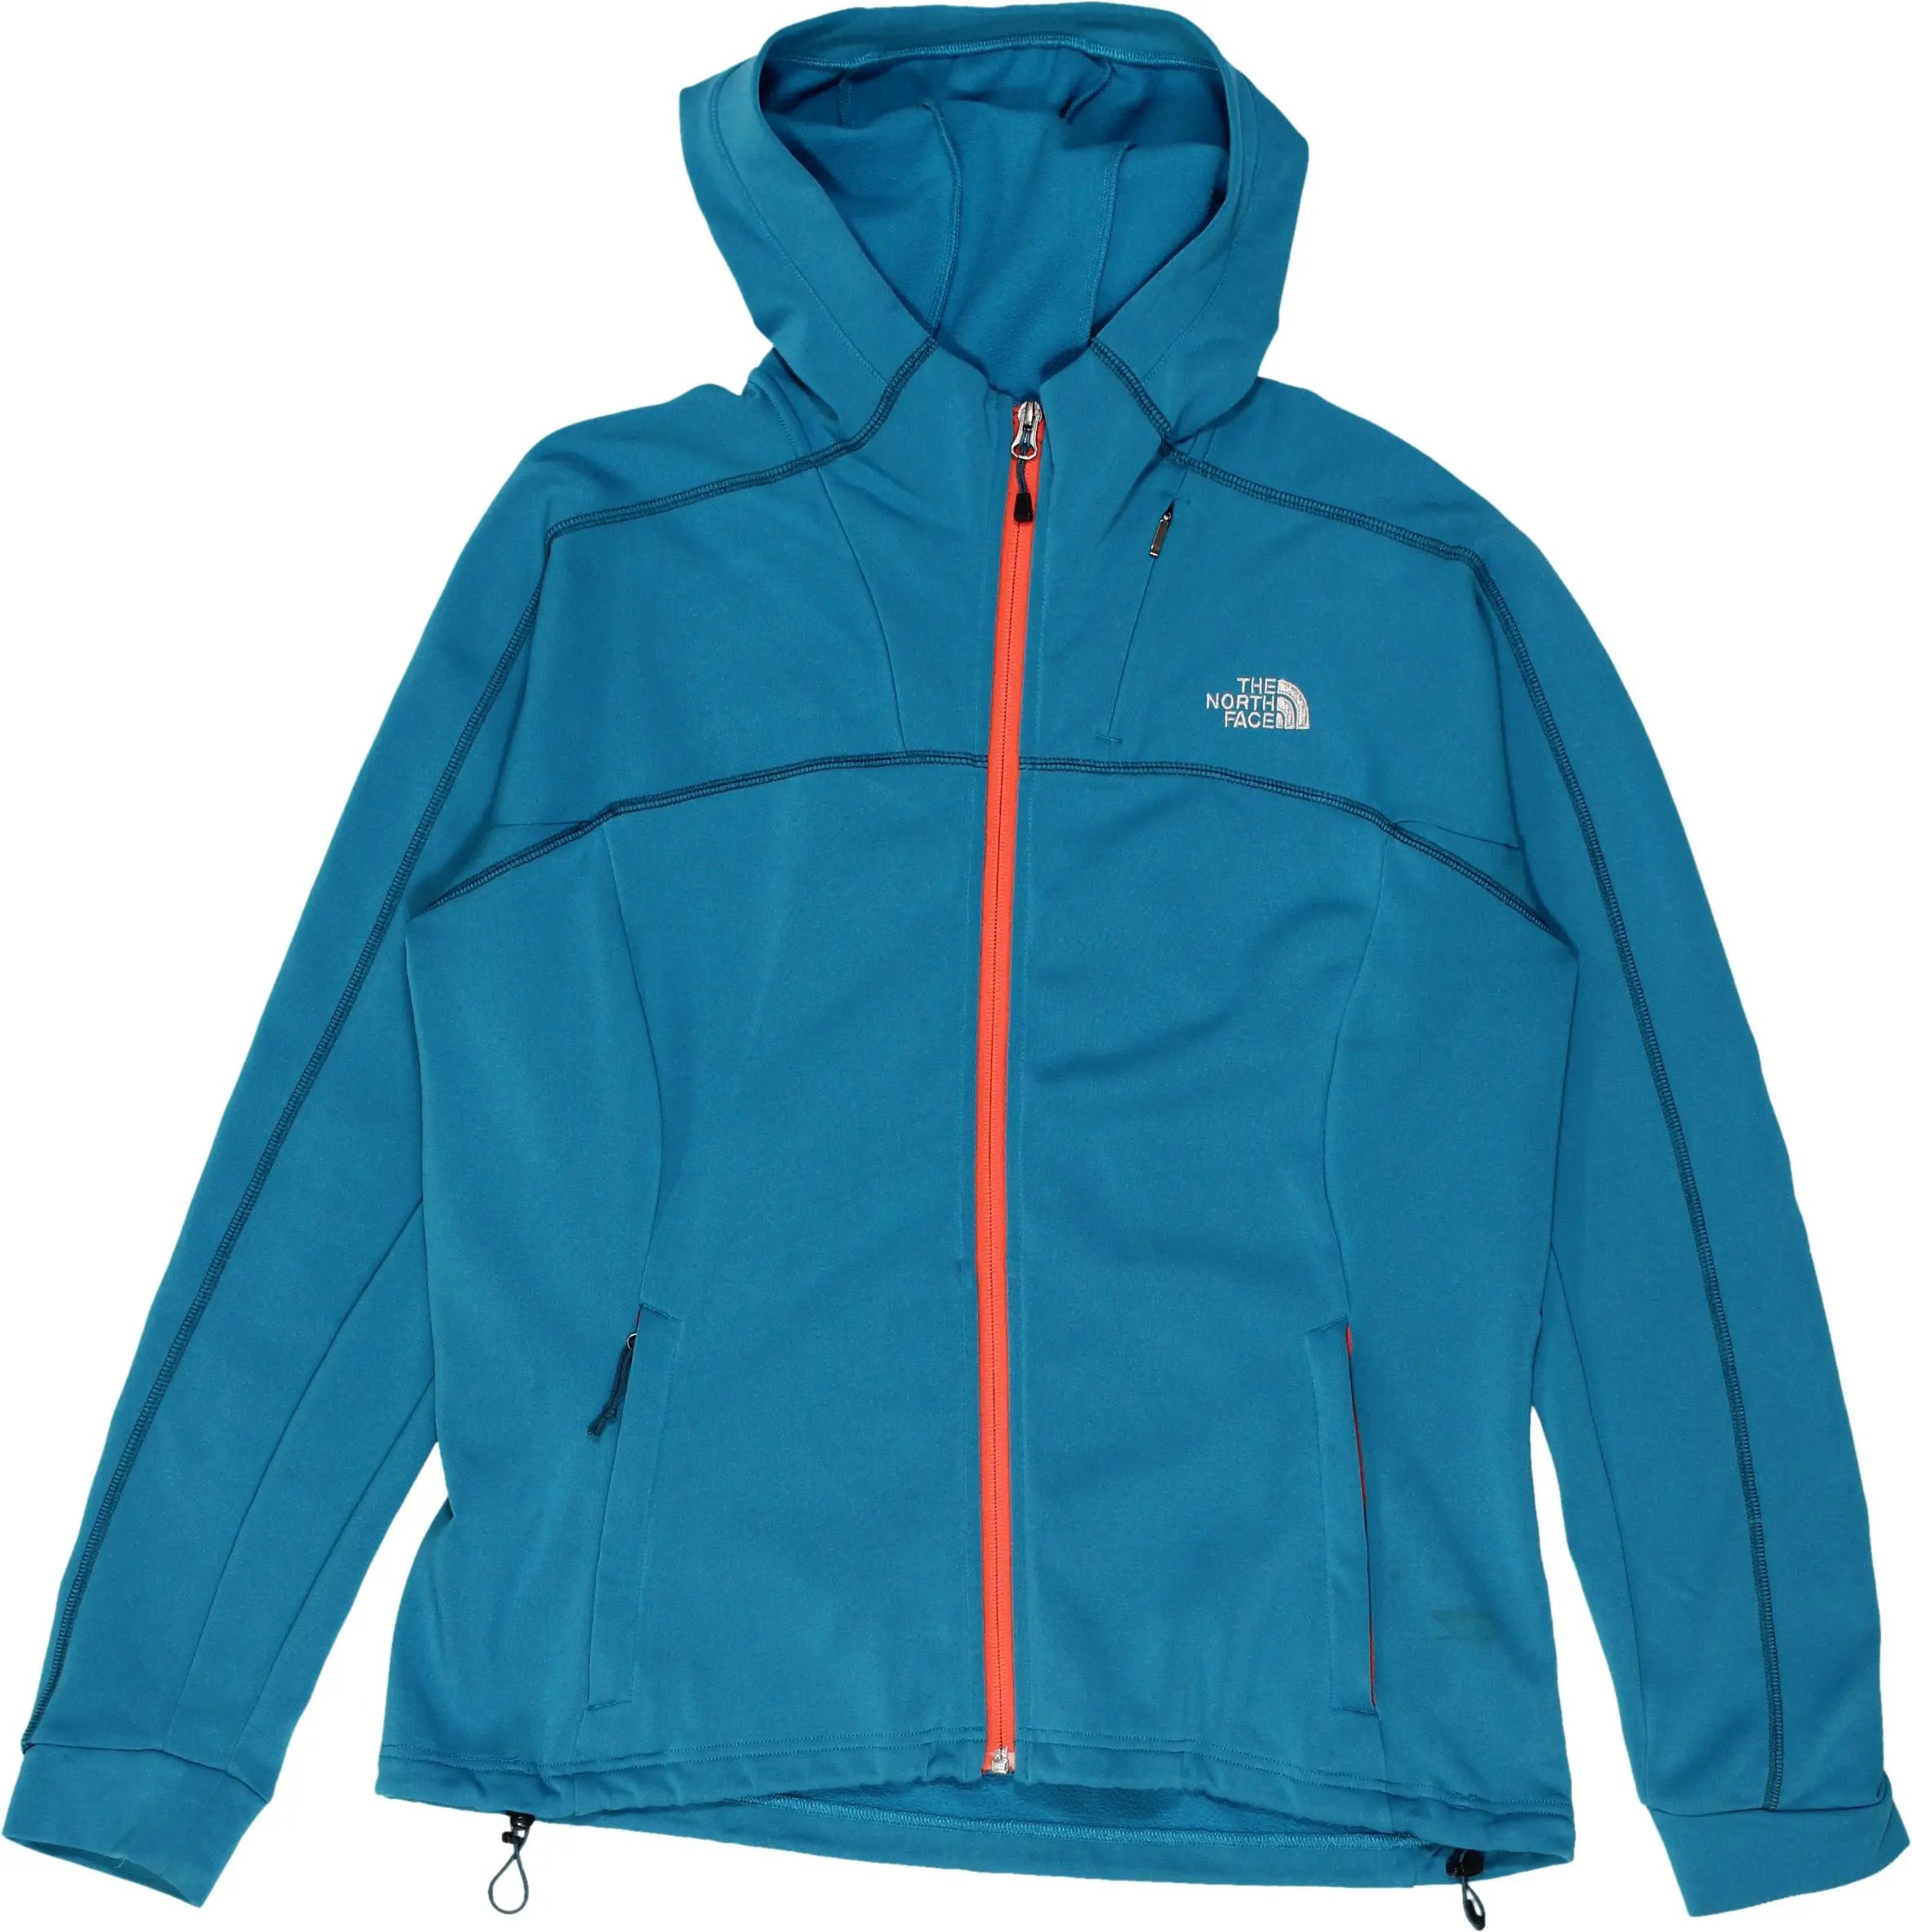 The North Face - The North Face Zip-up Hoodie- ThriftTale.com - Vintage and second handclothing